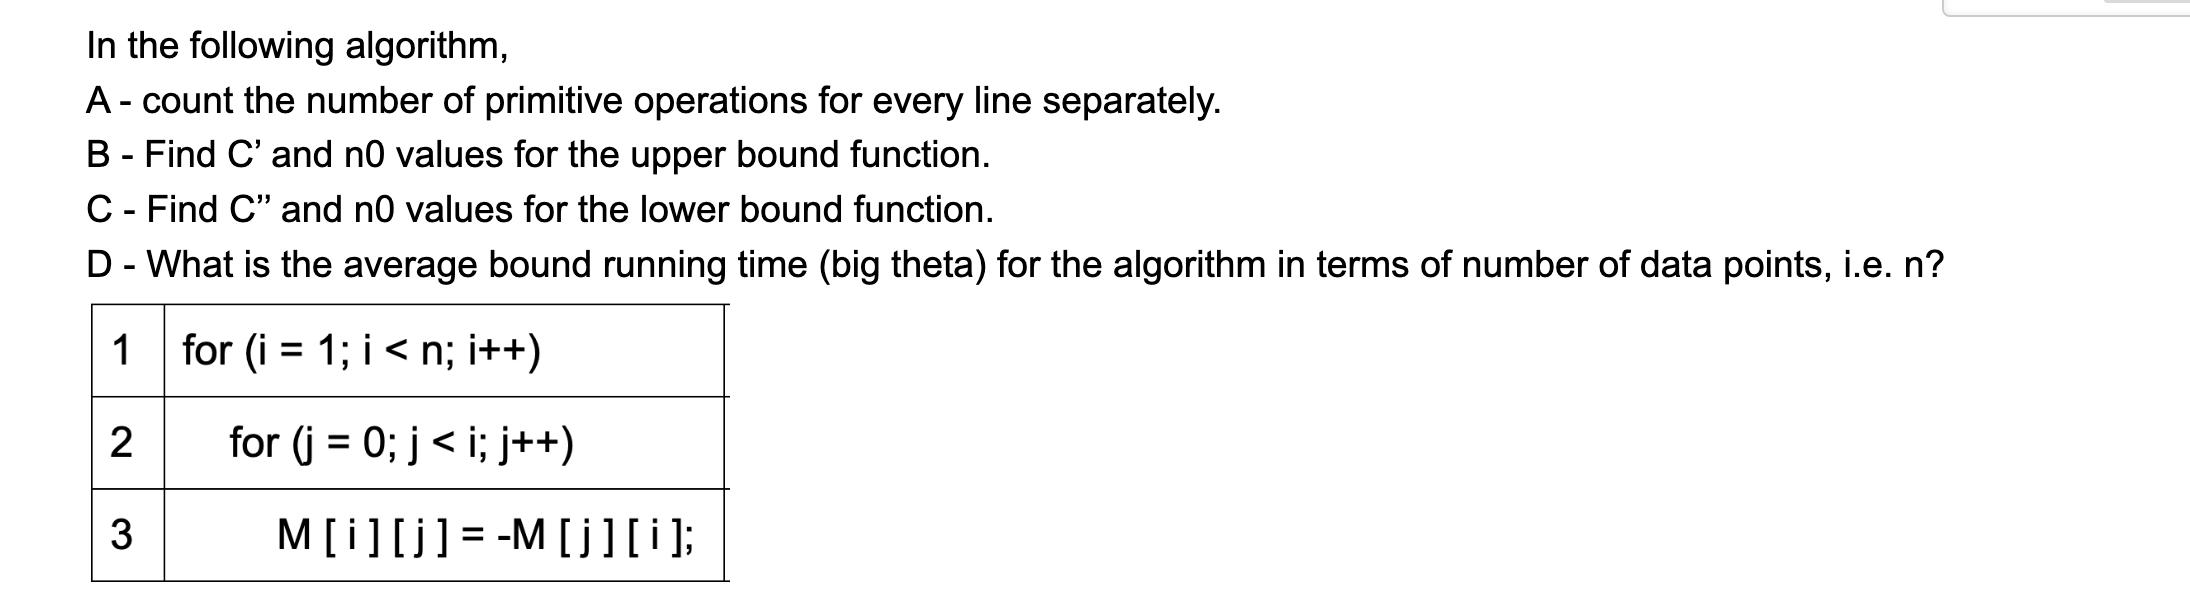 In the following algorithm, A - count the number of primitive operations for every line separately. B - Find